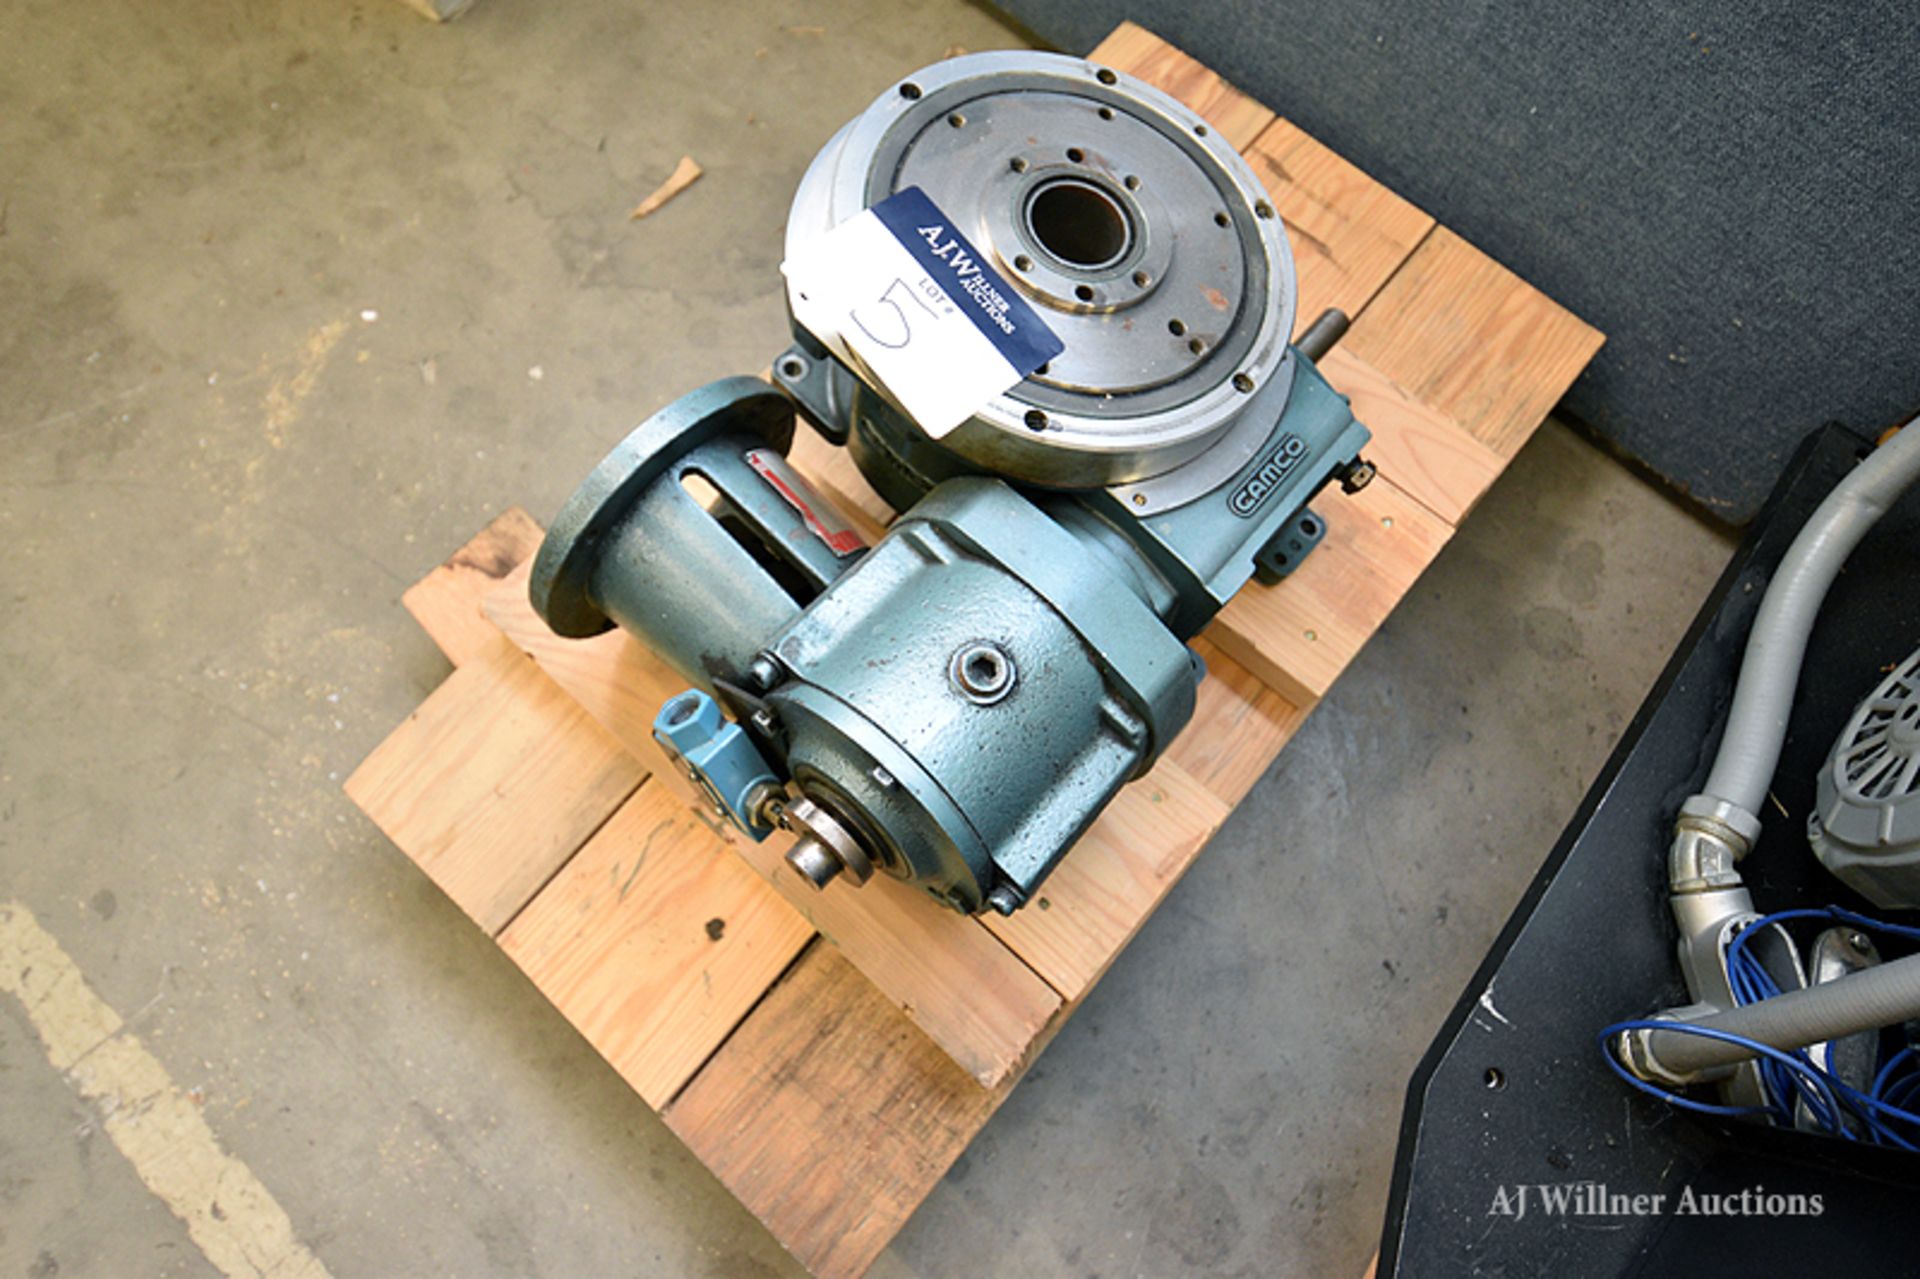 Camco Rotary Indexer